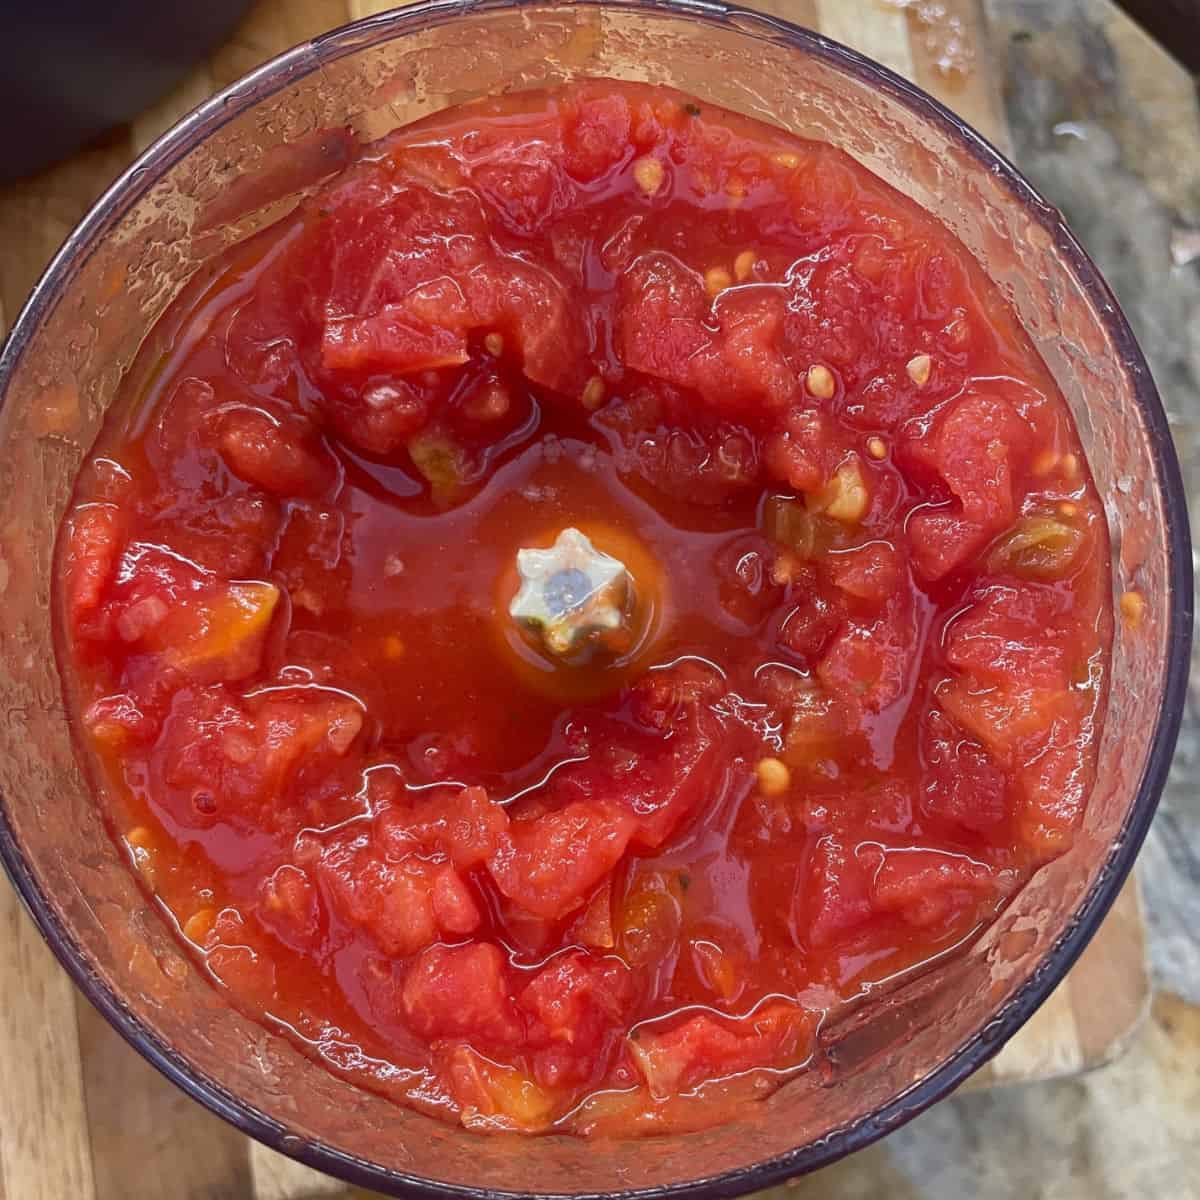 Rough chopping tomatoes in a food processor.